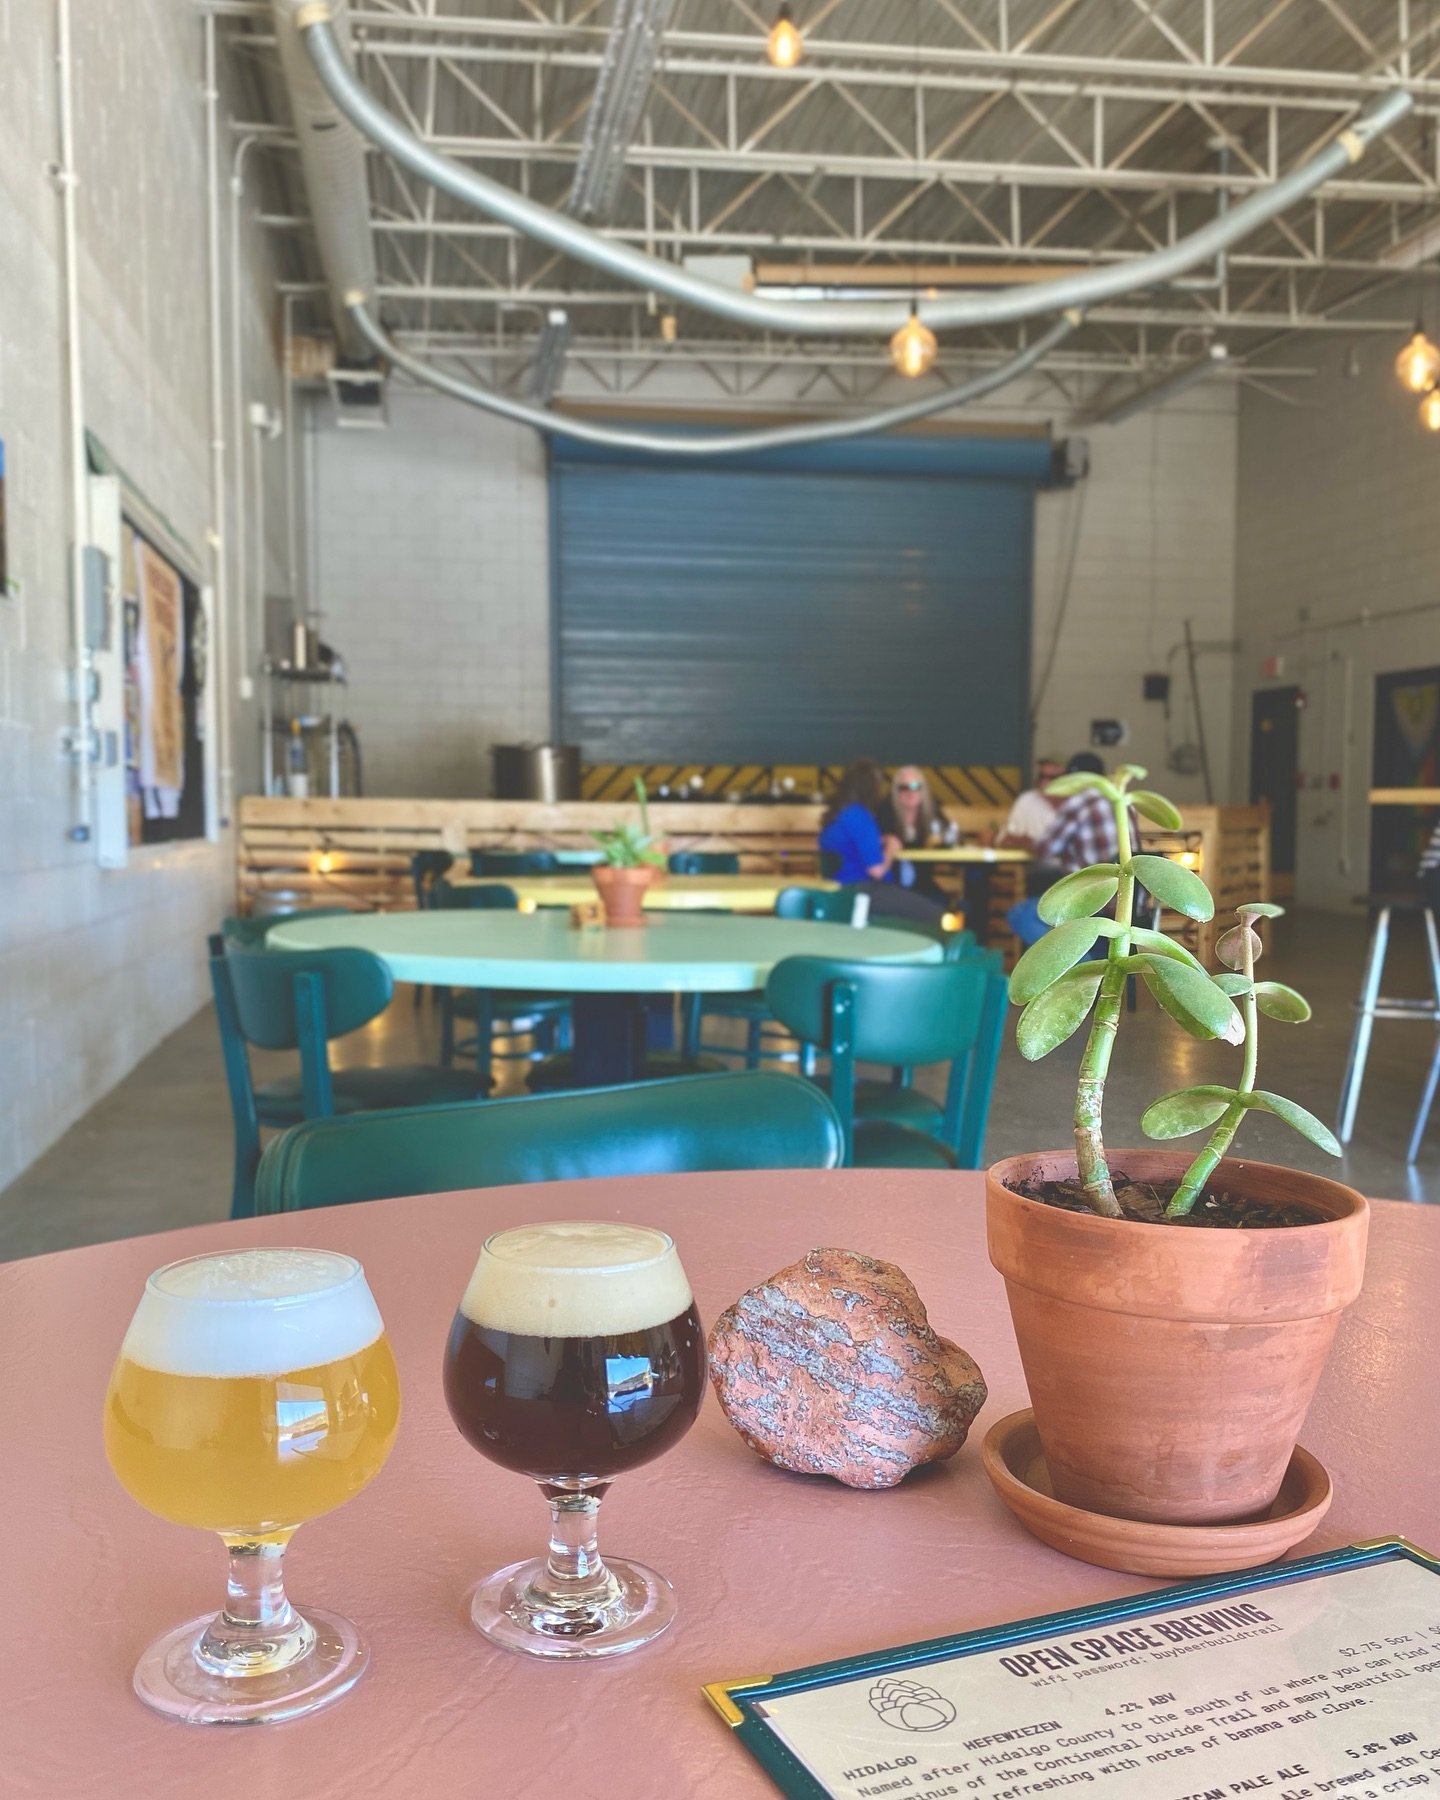 🚨Now pouring at Open Space Brewing!🚨

Hidalgo Hefeweizen 4.2%abv
The Turkey Dunkelweizen 4.0%abv 

Cheers to Mother&rsquo;s Day and all the mommas out there! Special shout-out to Shelley and Callie, moms of Open Space Brewing 💛💛💛 Thank you for s